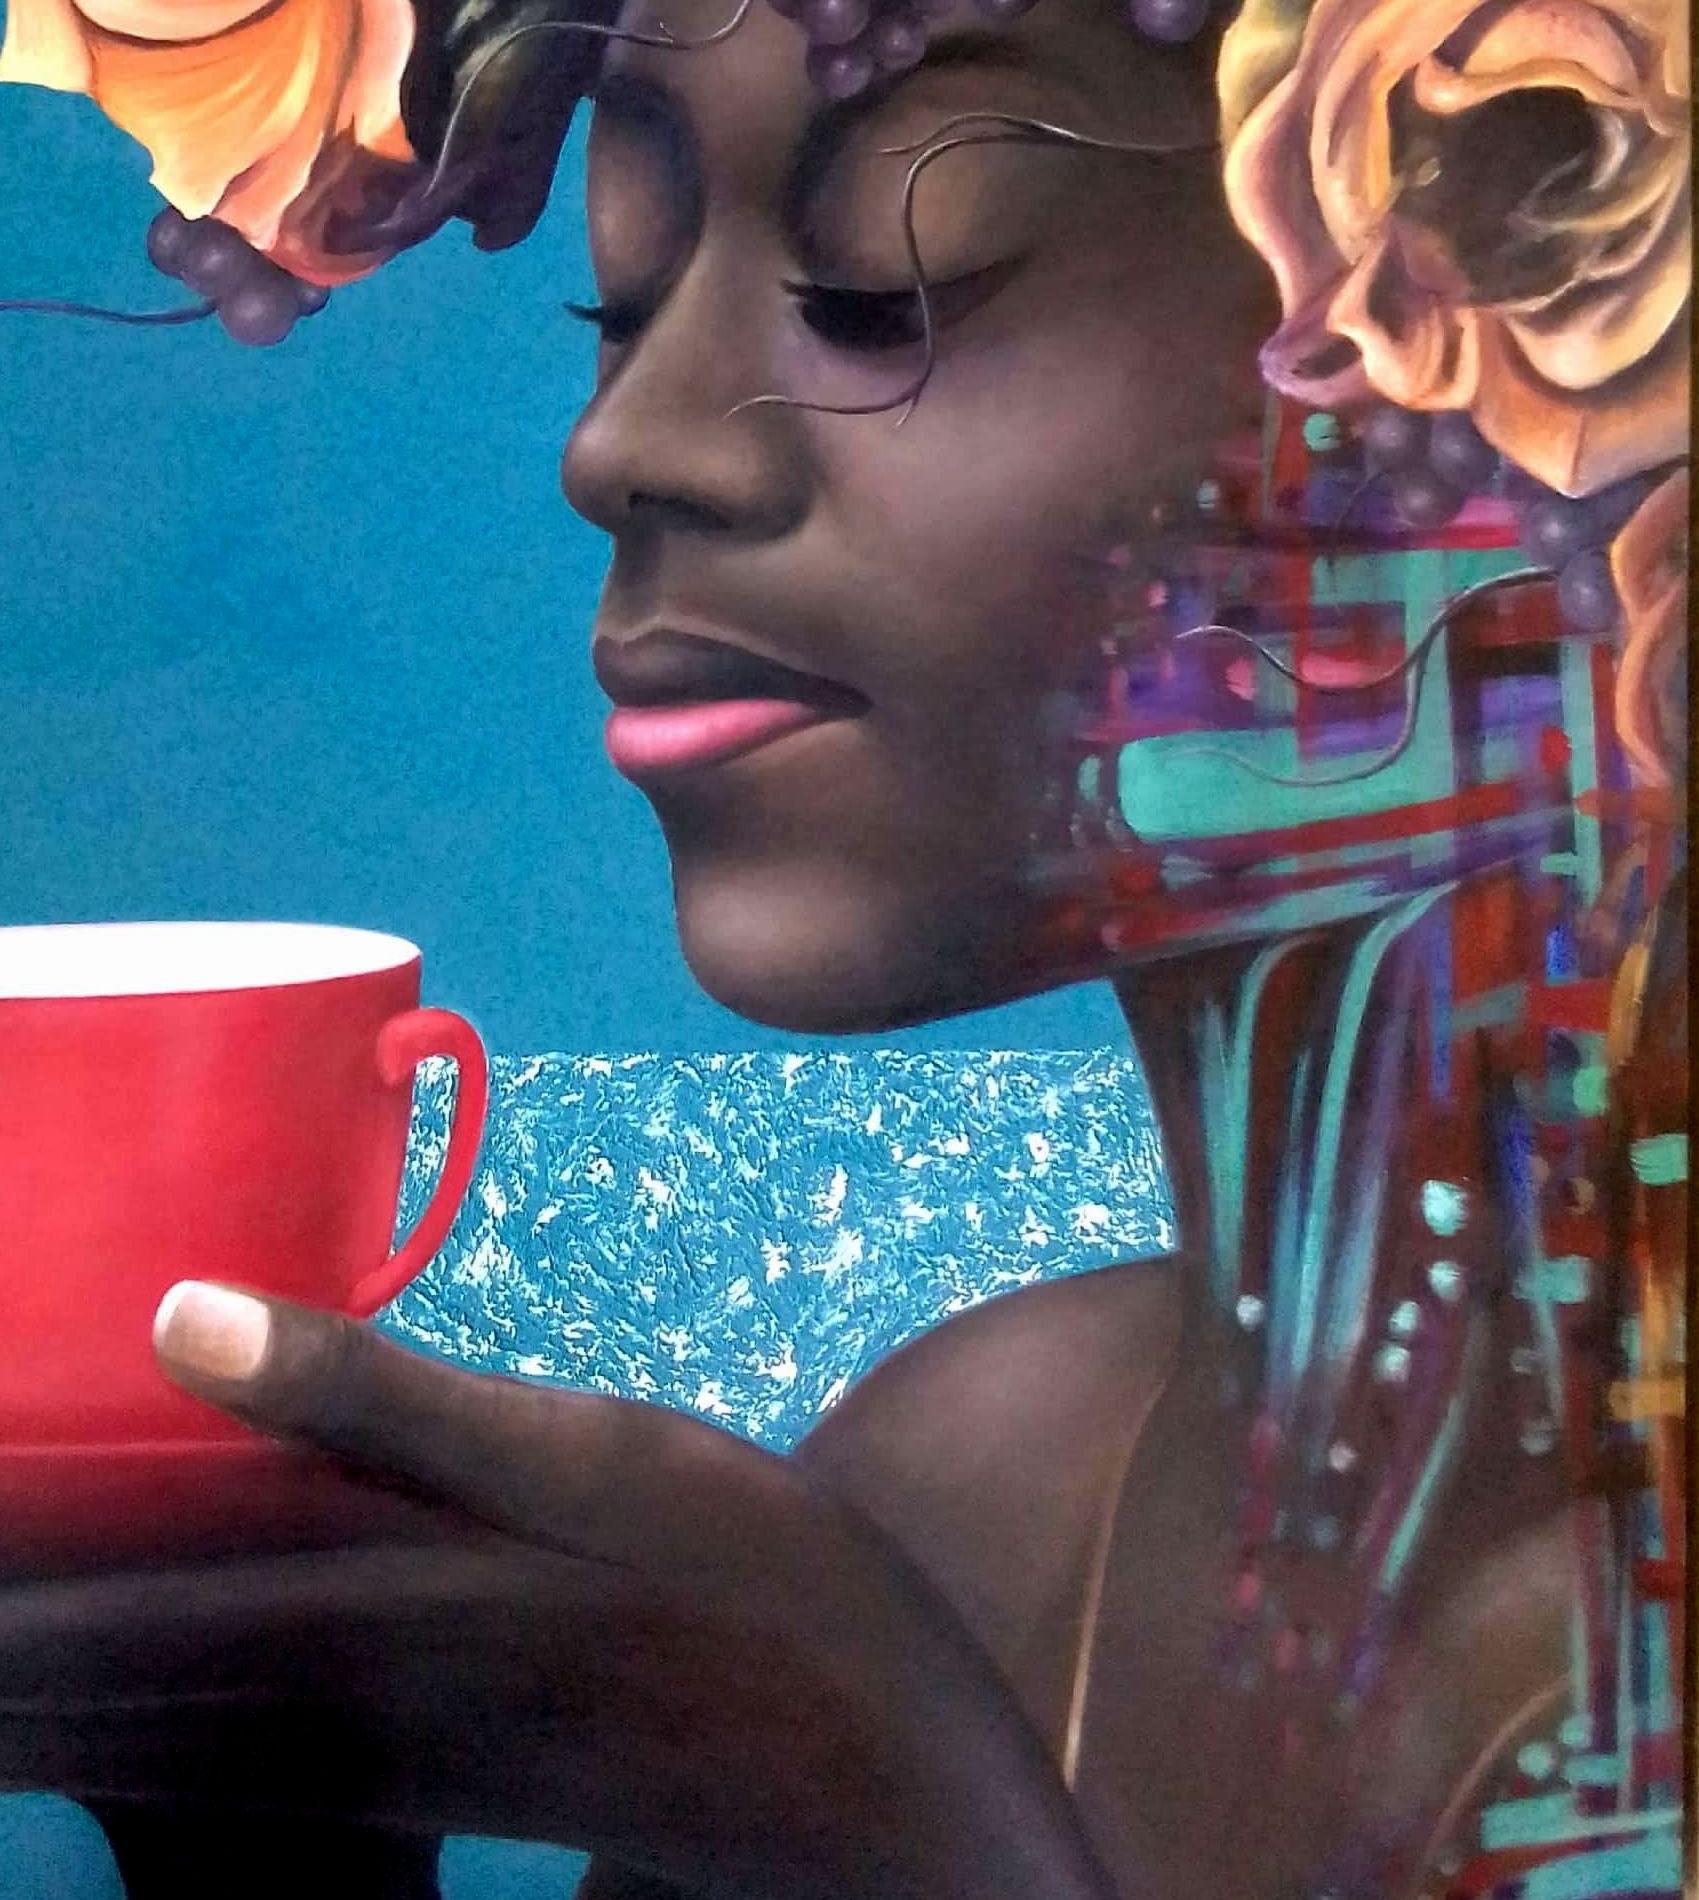 The Cup of my love is a painting by Chima Theophilus, depicting an African woman with a teacup.

Her hair is made of grapefruits and flowers, signifying her fruitfulness and love.
A virtuous woman is indeed the crown of her home.
She gives her